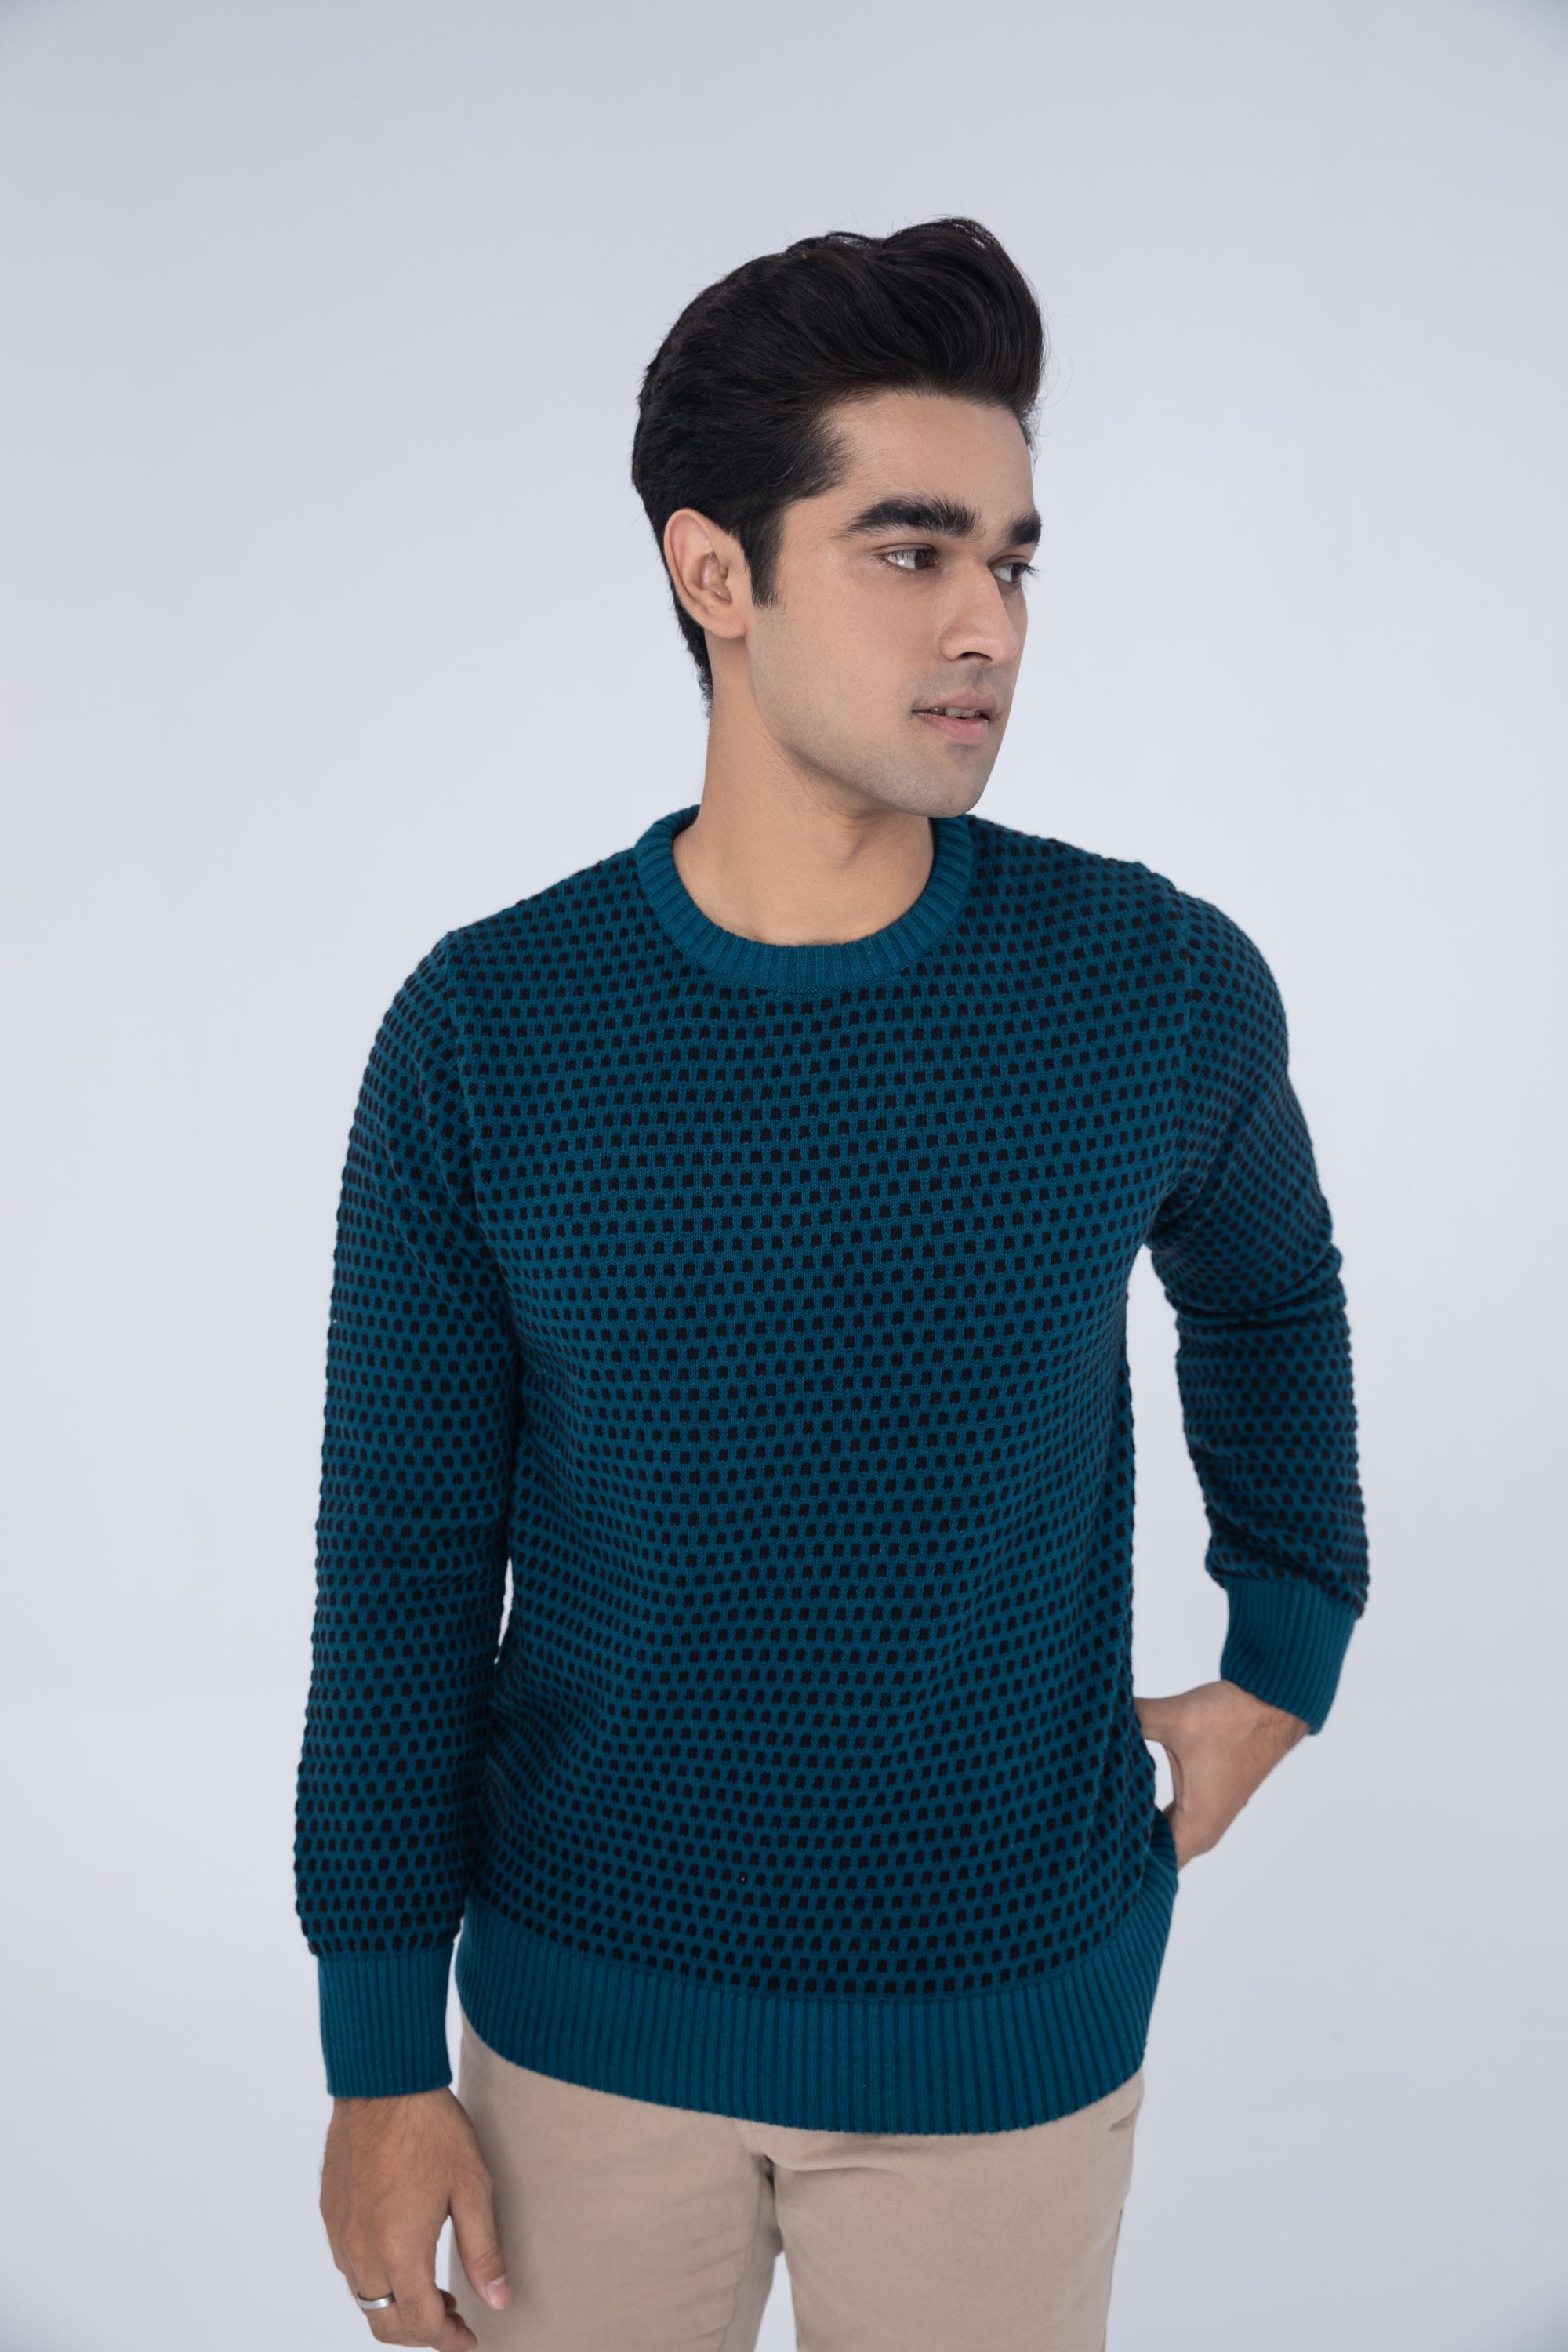 Teal Sweater Gents R-Nk